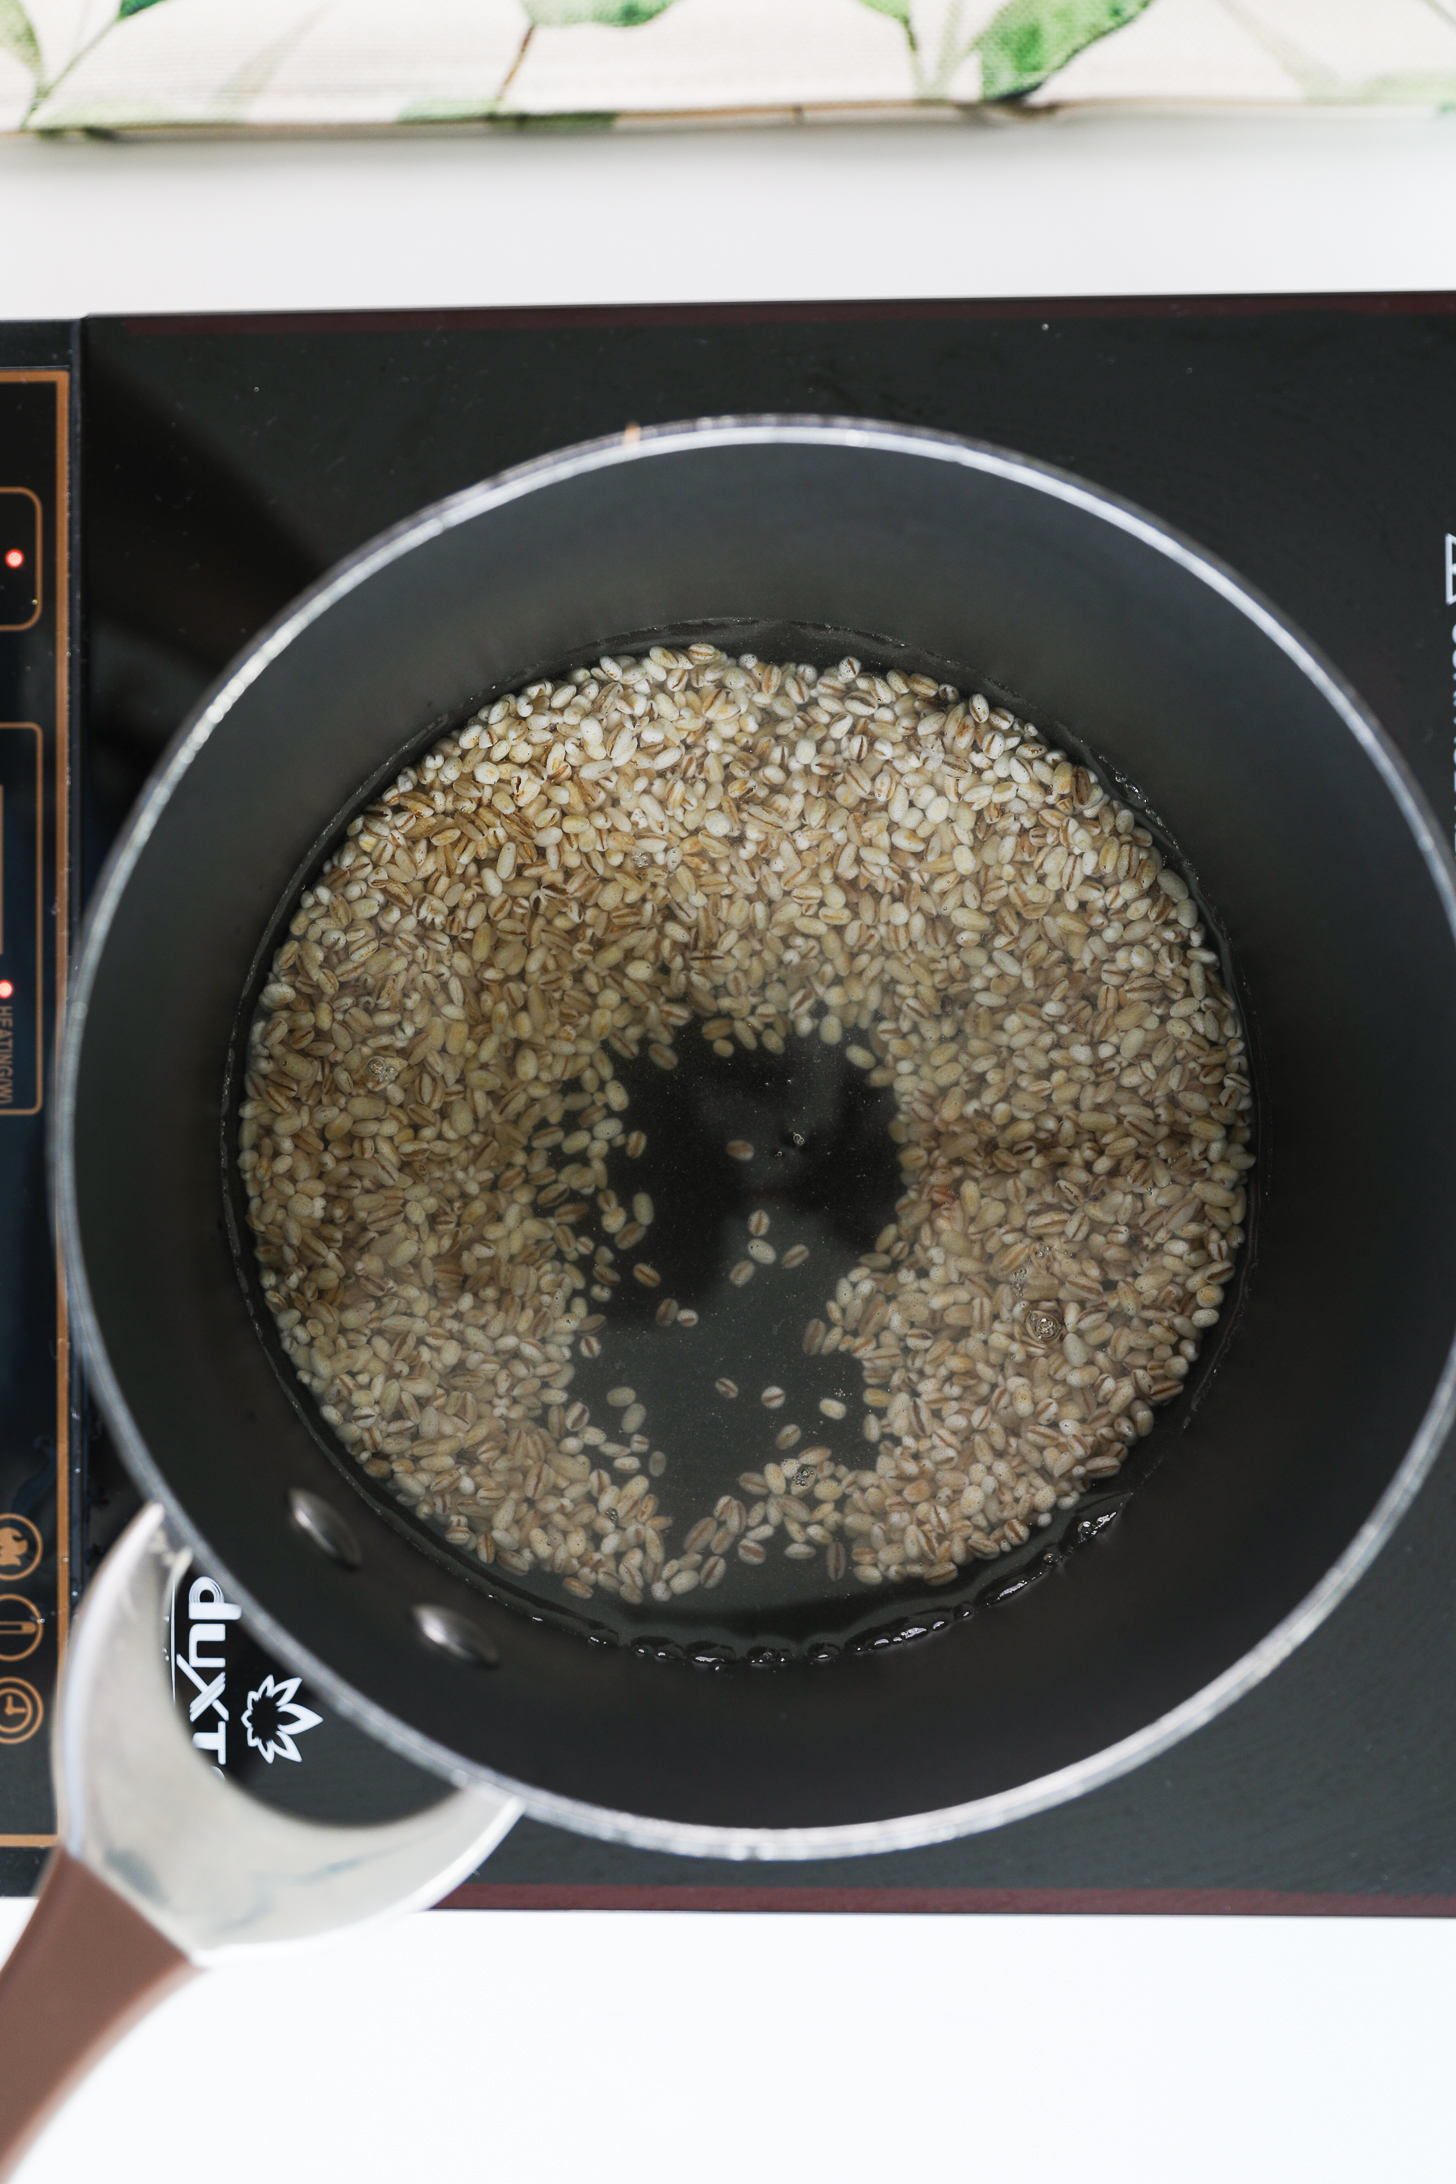 Saucepan with barley submerged in water on a mobile cooktop.